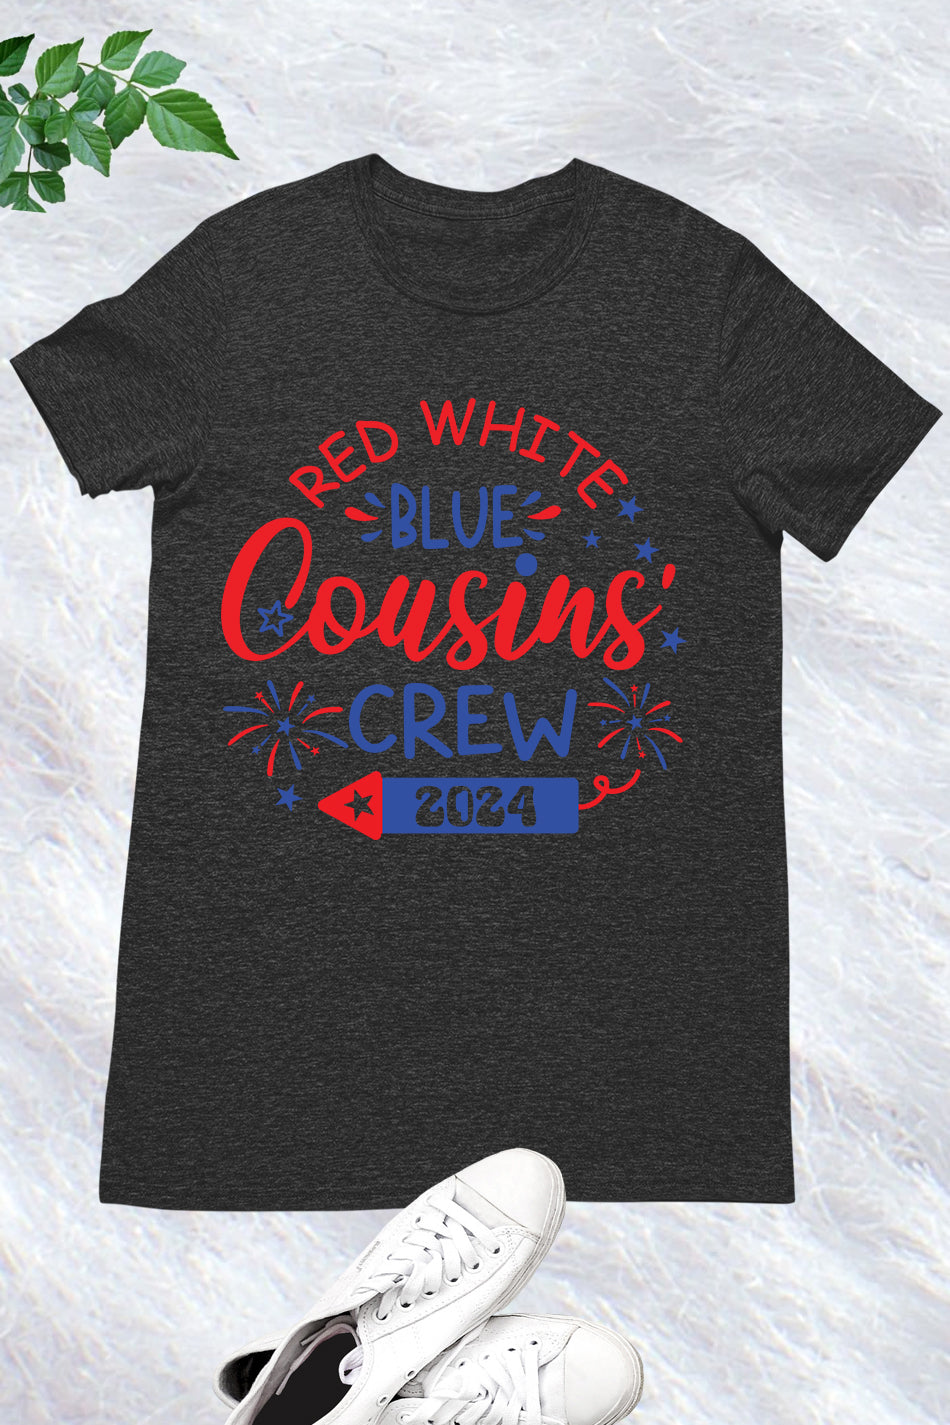 Red White Blue Family 4th Of July Family Crew Independence T-Shirts